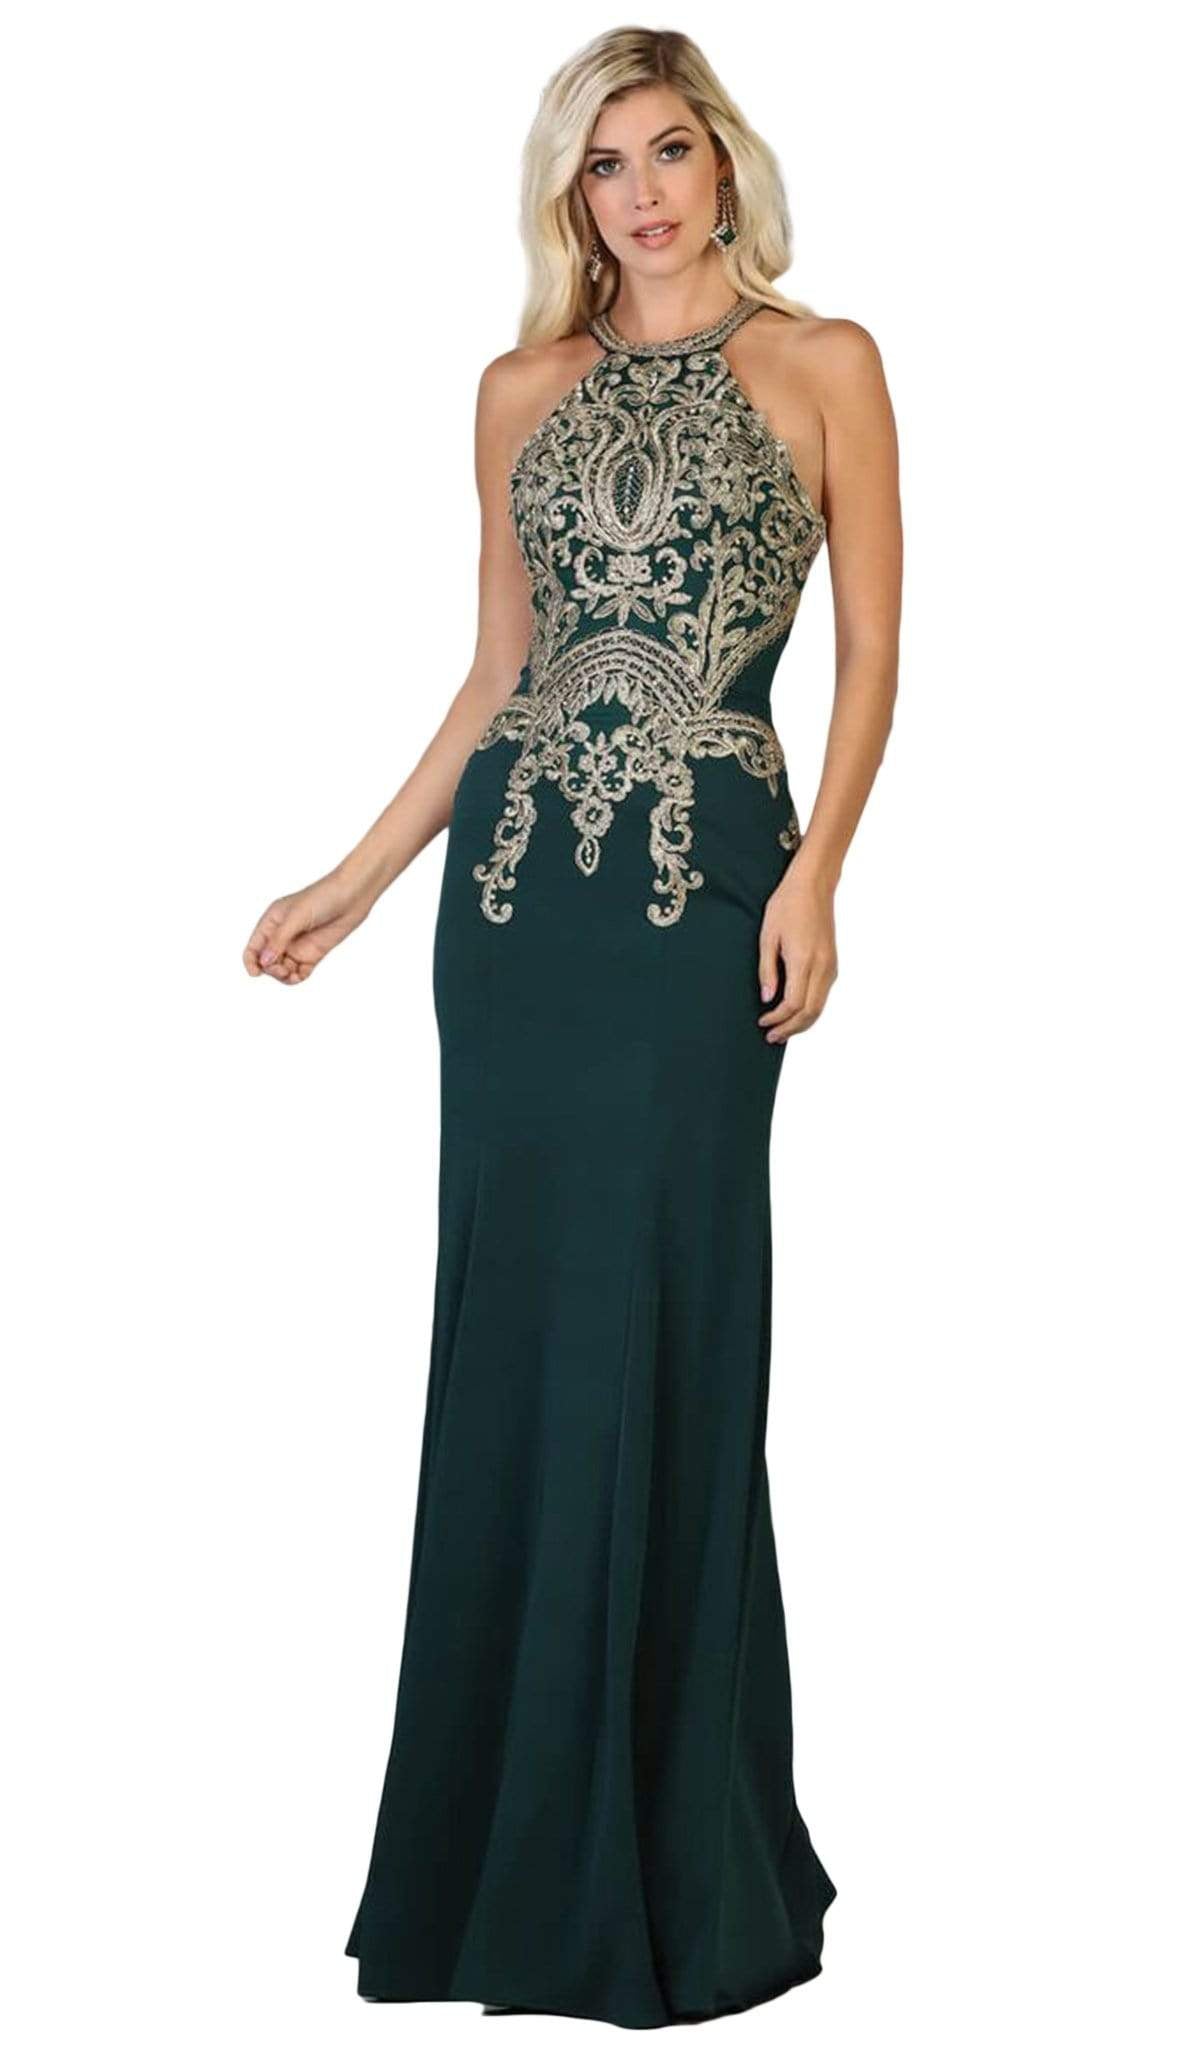 May Queen - MQ1641 Gilt-Embroidered Lace Halter Gown Special Occasion Dress 4 / Hunter Green